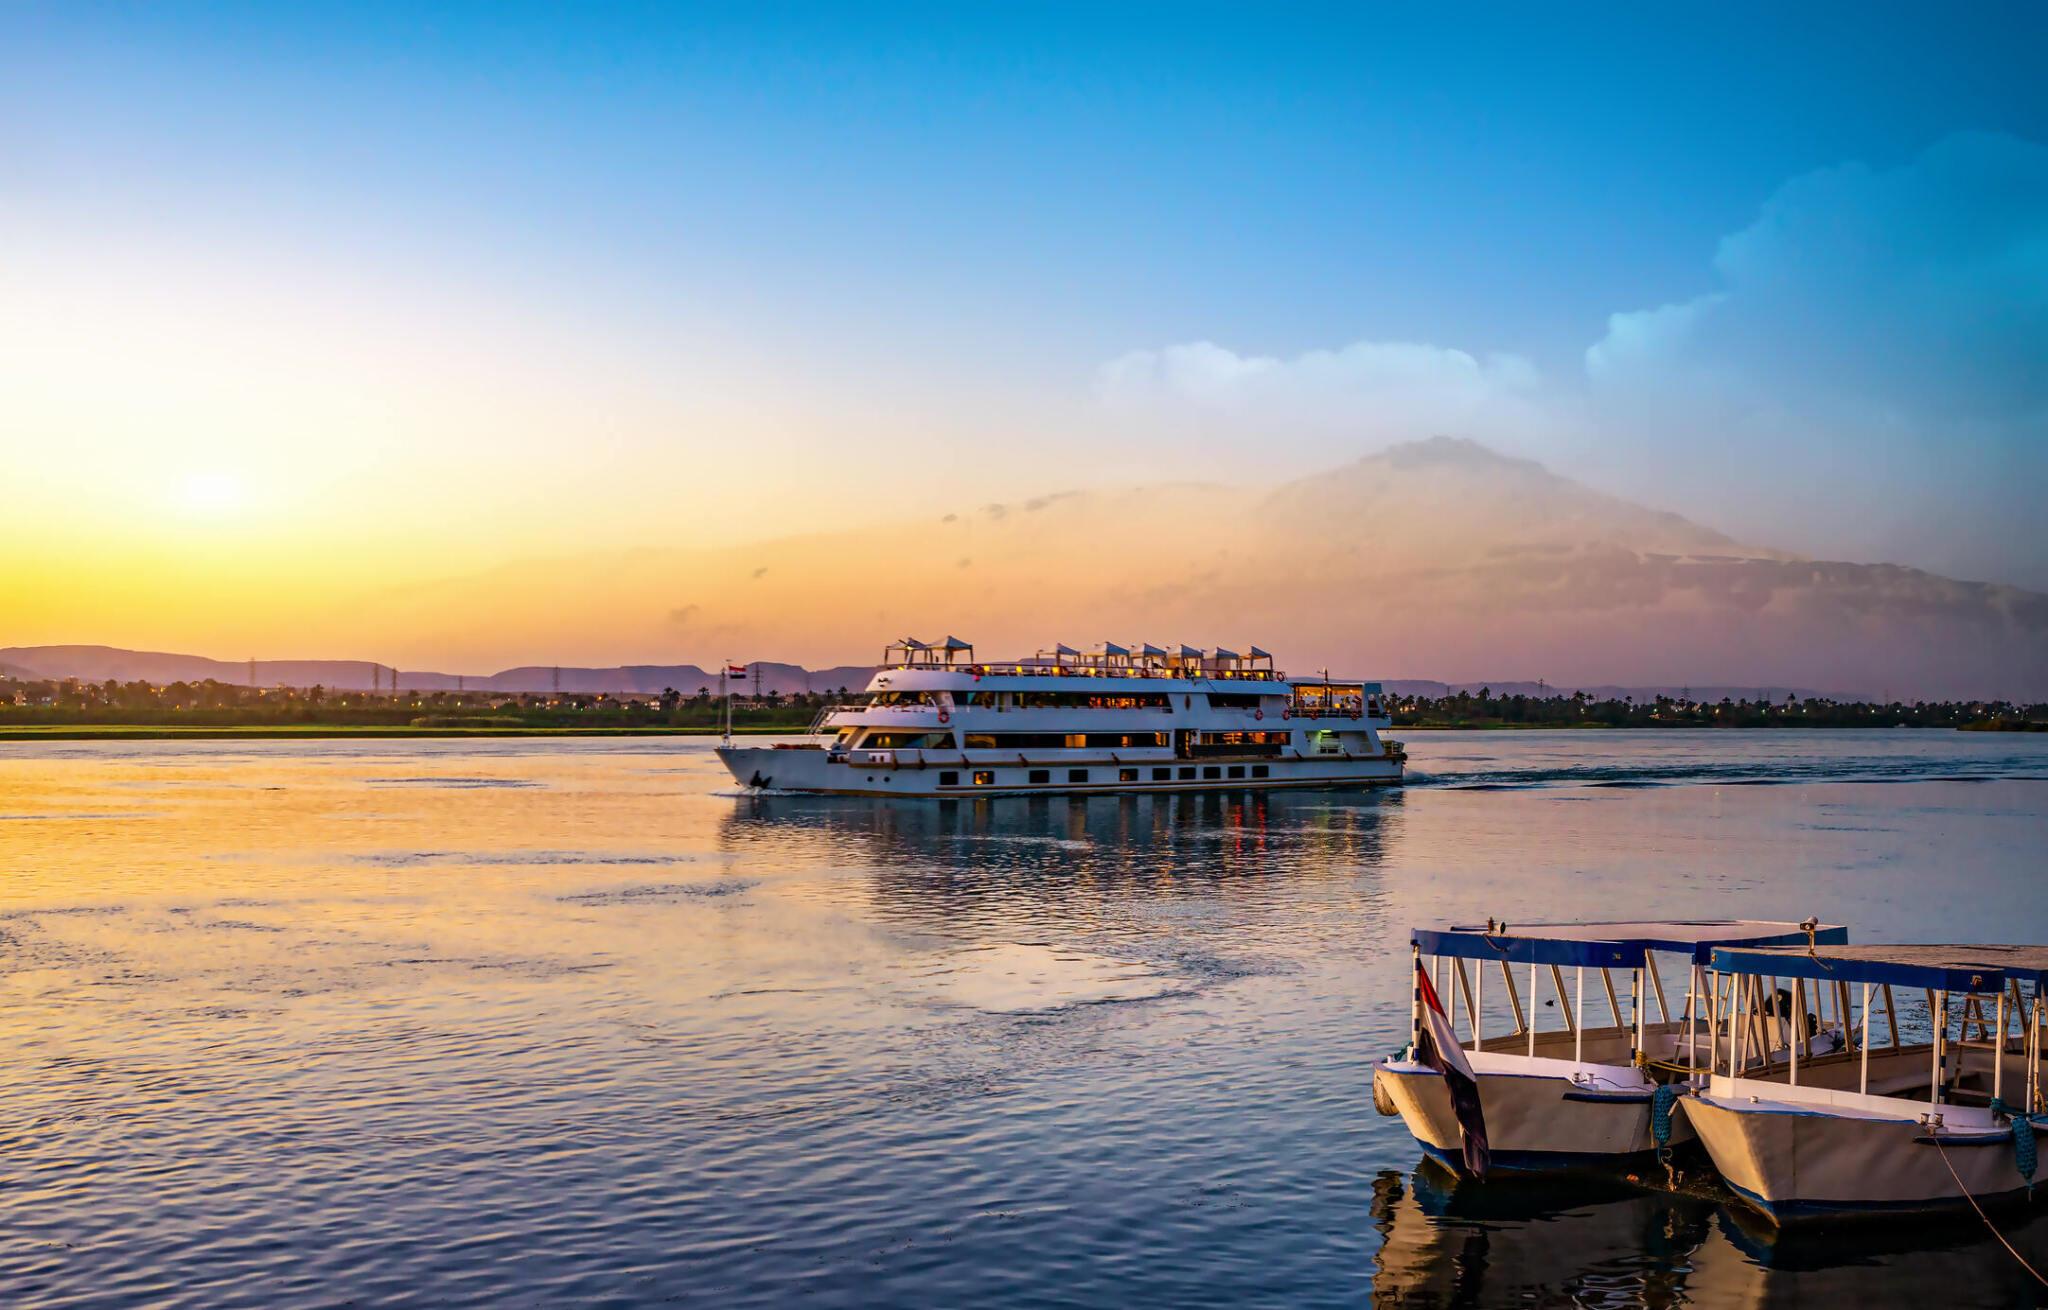 Read This Post Before You Go for the Nile River Cruise